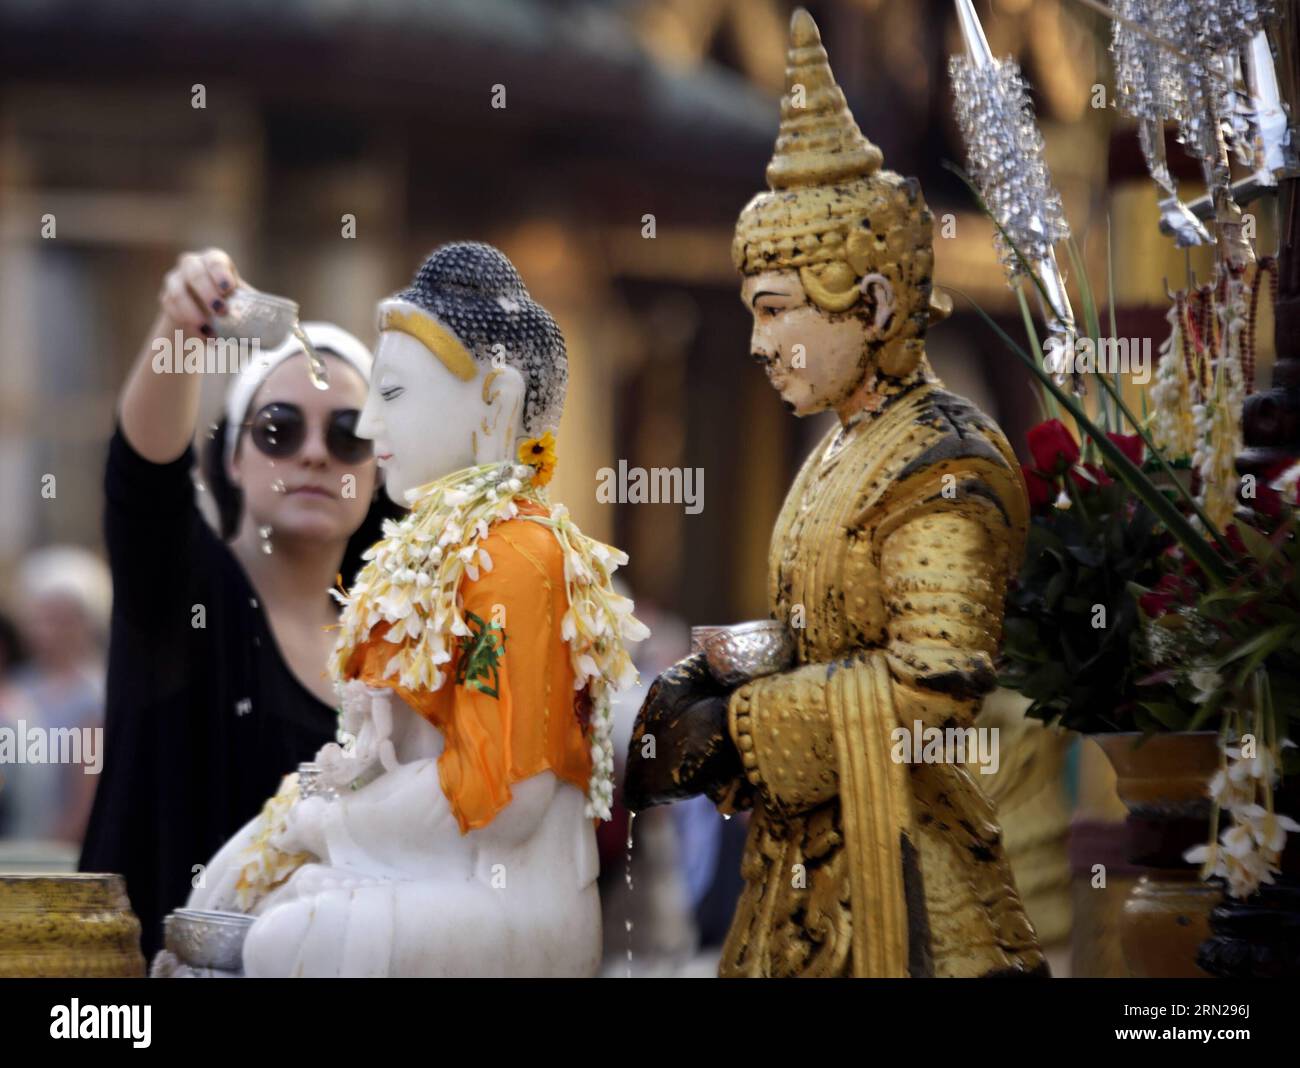 YANGON, Feb. 17, 2015 -- A visitor pours water over a Buddha statue at the Shwedagon pagoda in Yangon, Myanmar, Feb. 17, 2015. Shwedagon Pagoda is a repository of the best of Myanmar s heritages -- architecture, sculpture and arts. It consists of hundreds of colorful temples, stupas and statues that reflect architectural styles spanning almost 2,500 years. ) MYANMAR-YANGON-SHWEDAGON PAGODA UxAung PUBLICATIONxNOTxINxCHN   Yangon Feb 17 2015 a Visitor pour Water Over a Buddha Statue AT The Shwedagon Pagoda in Yangon Myanmar Feb 17 2015 Shwedagon Pagoda IS a repository of The Best of Myanmar S he Stock Photo